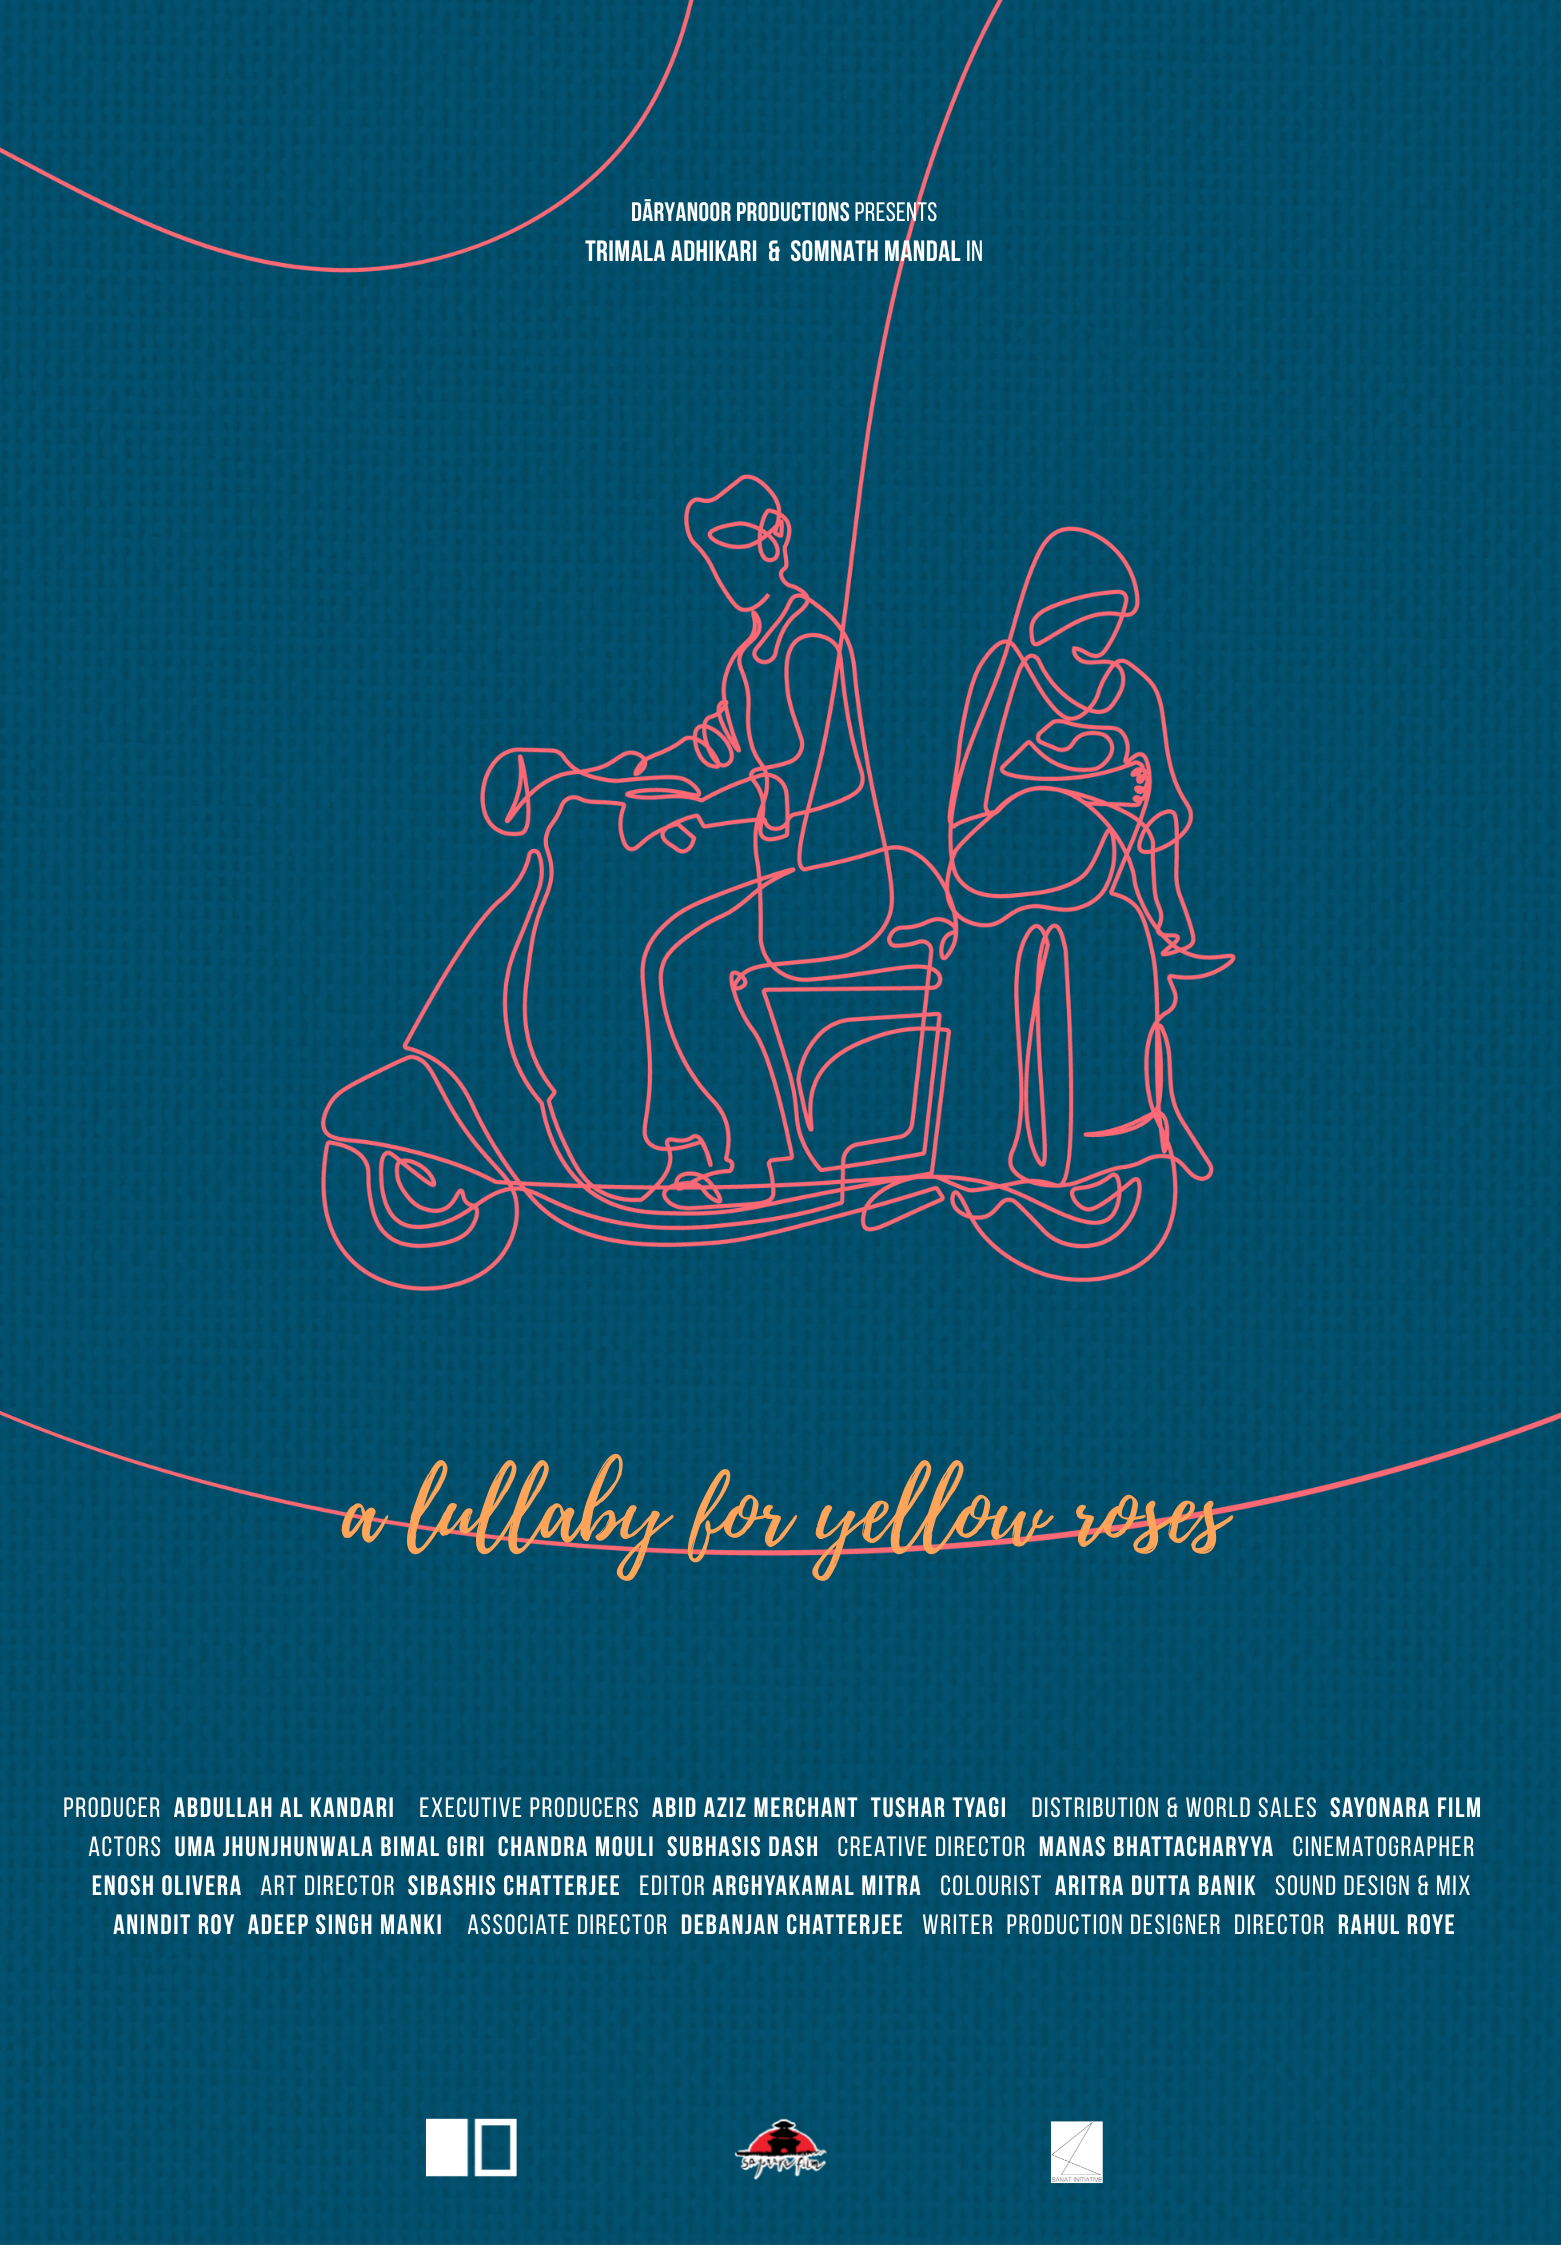 A Lullaby for Yellow Roses<h3 style="font-size:10px; line-height:20px;">di Rahul Roye</h3>